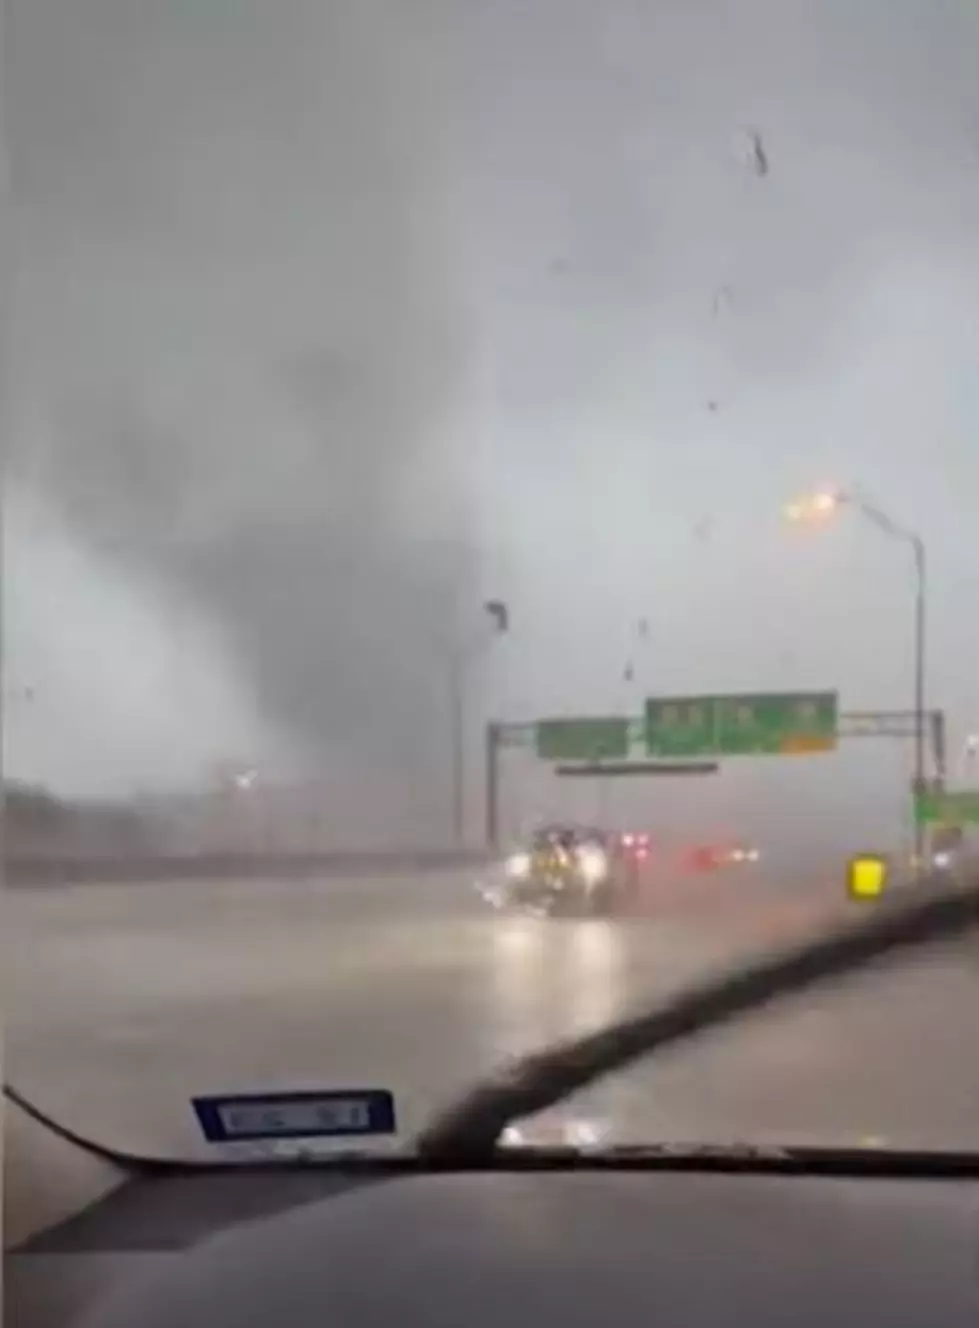 Drivers Trying to Avoid Running Into Tornadoes in Texas [Watch]